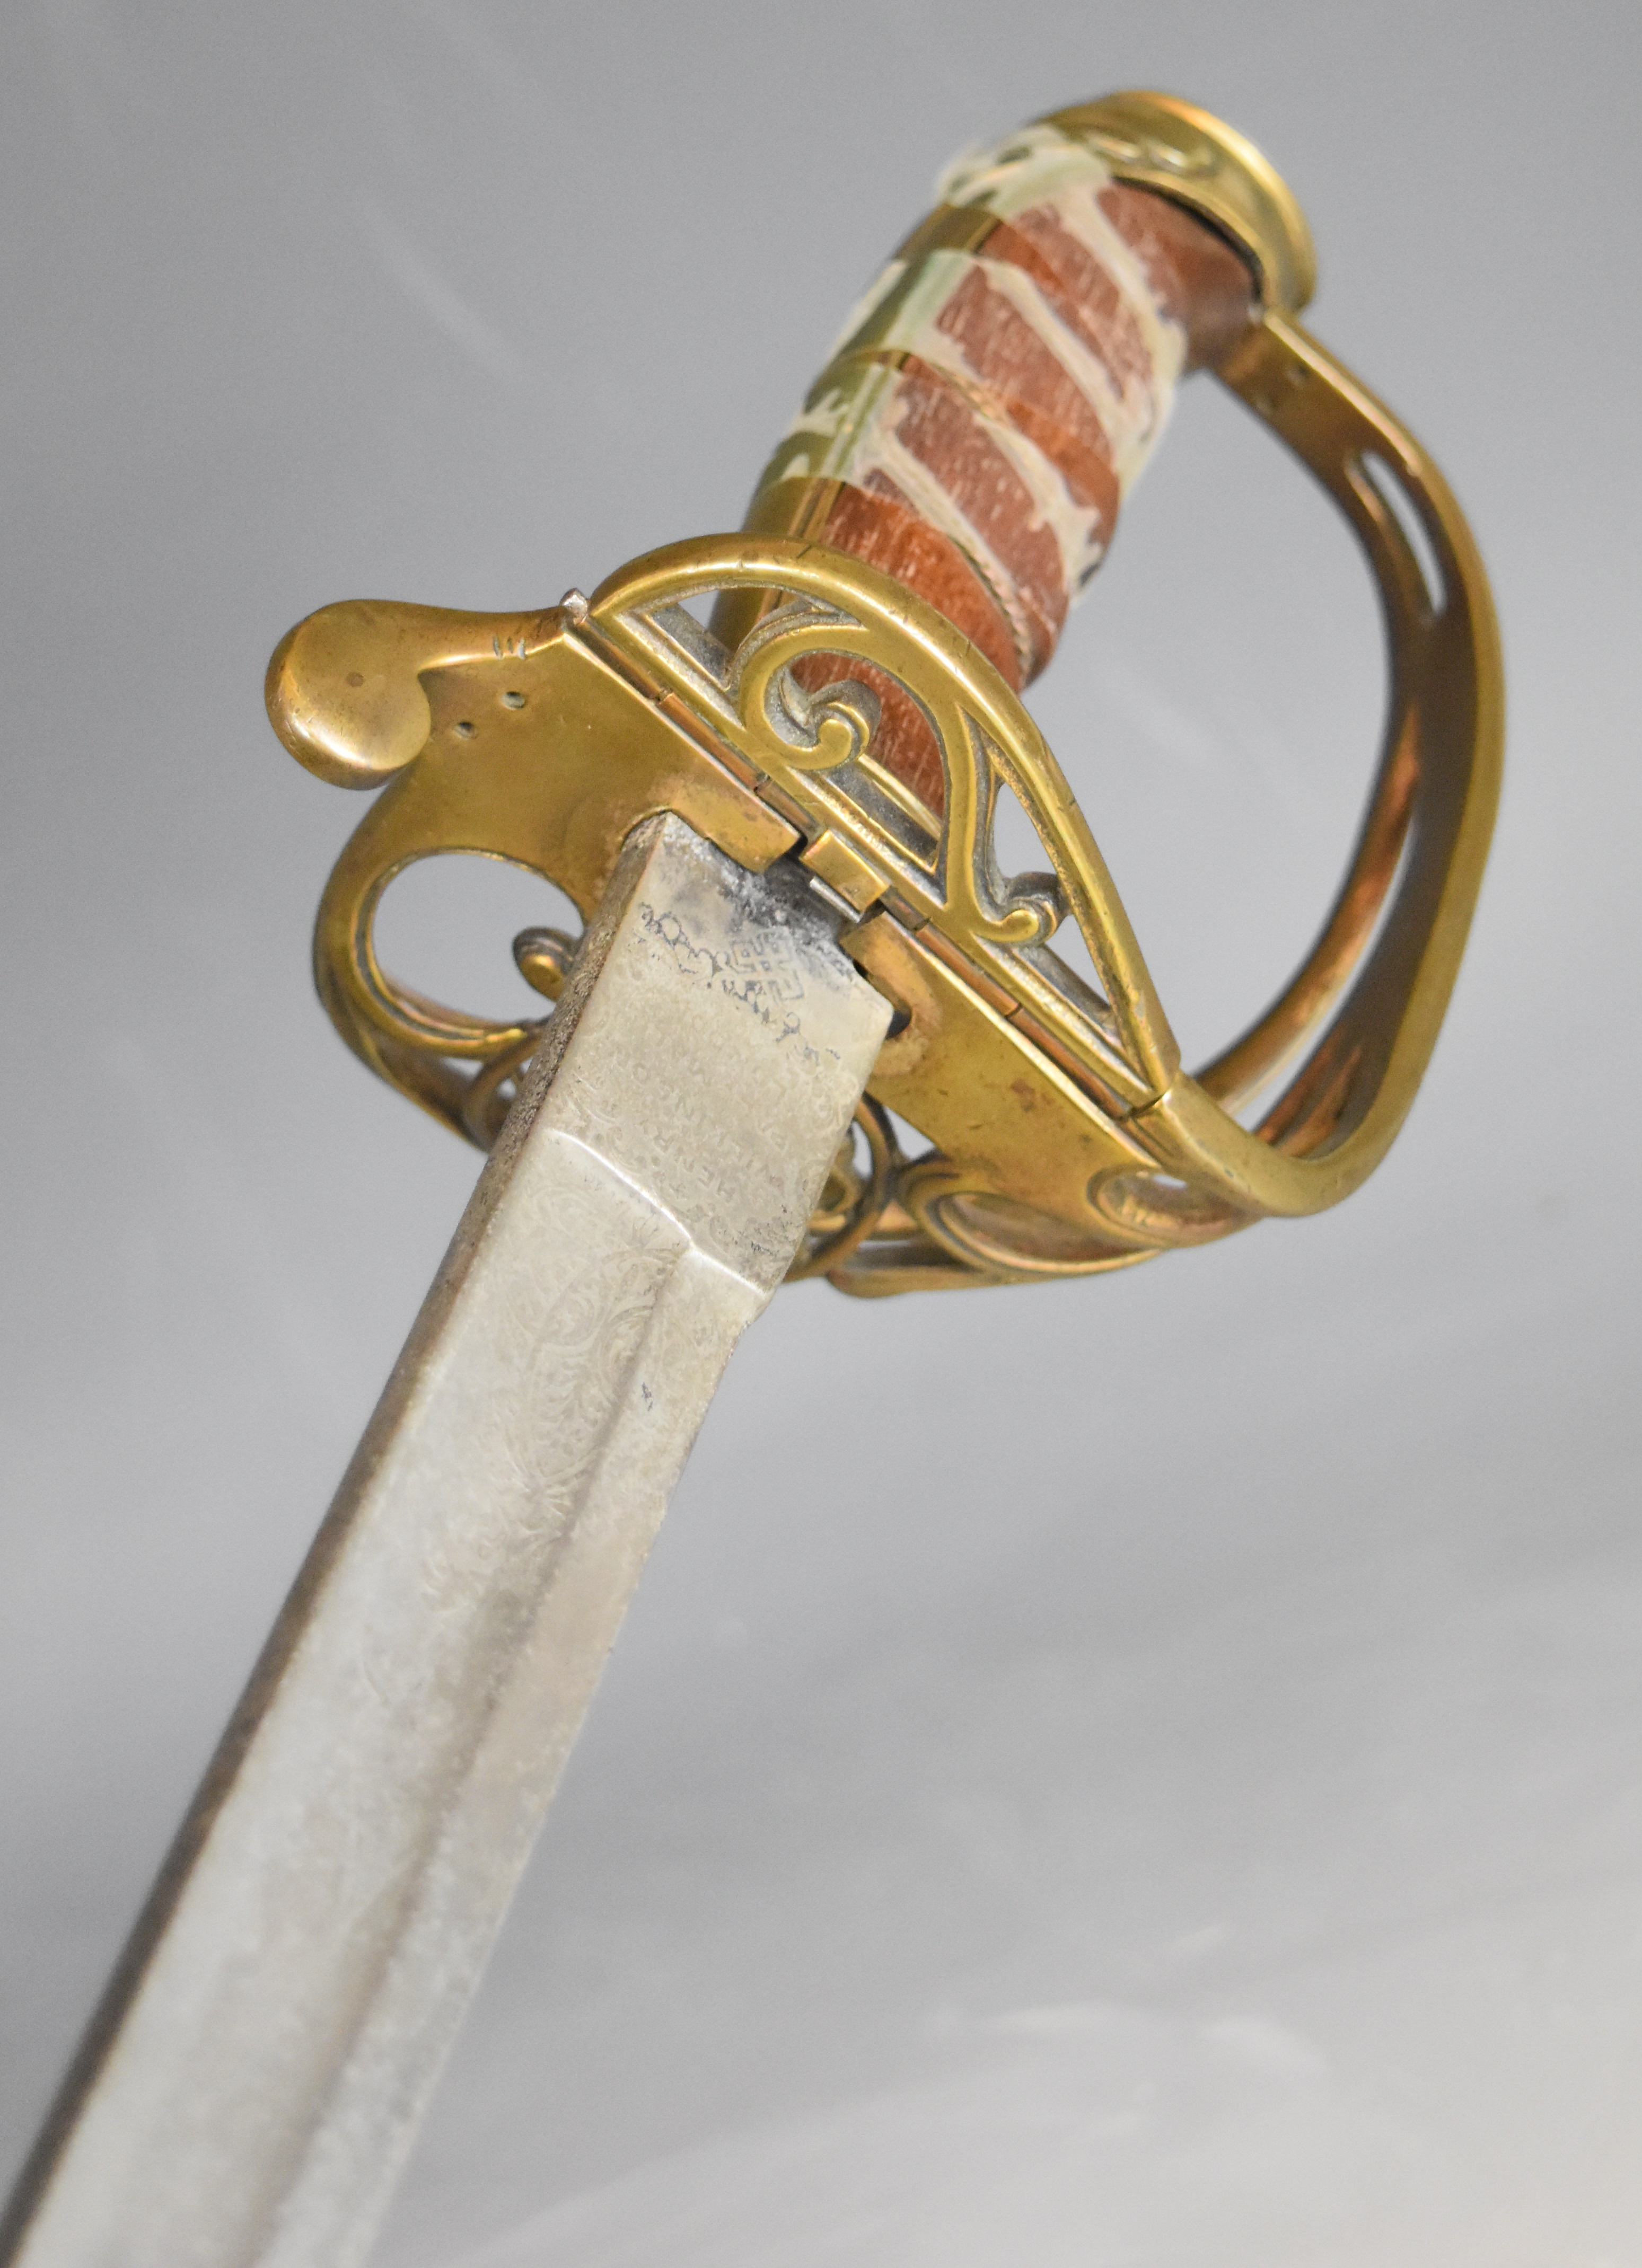 British Army 1822 pattern infantry officer's sword with folding guard, Queen Victoria cypher to